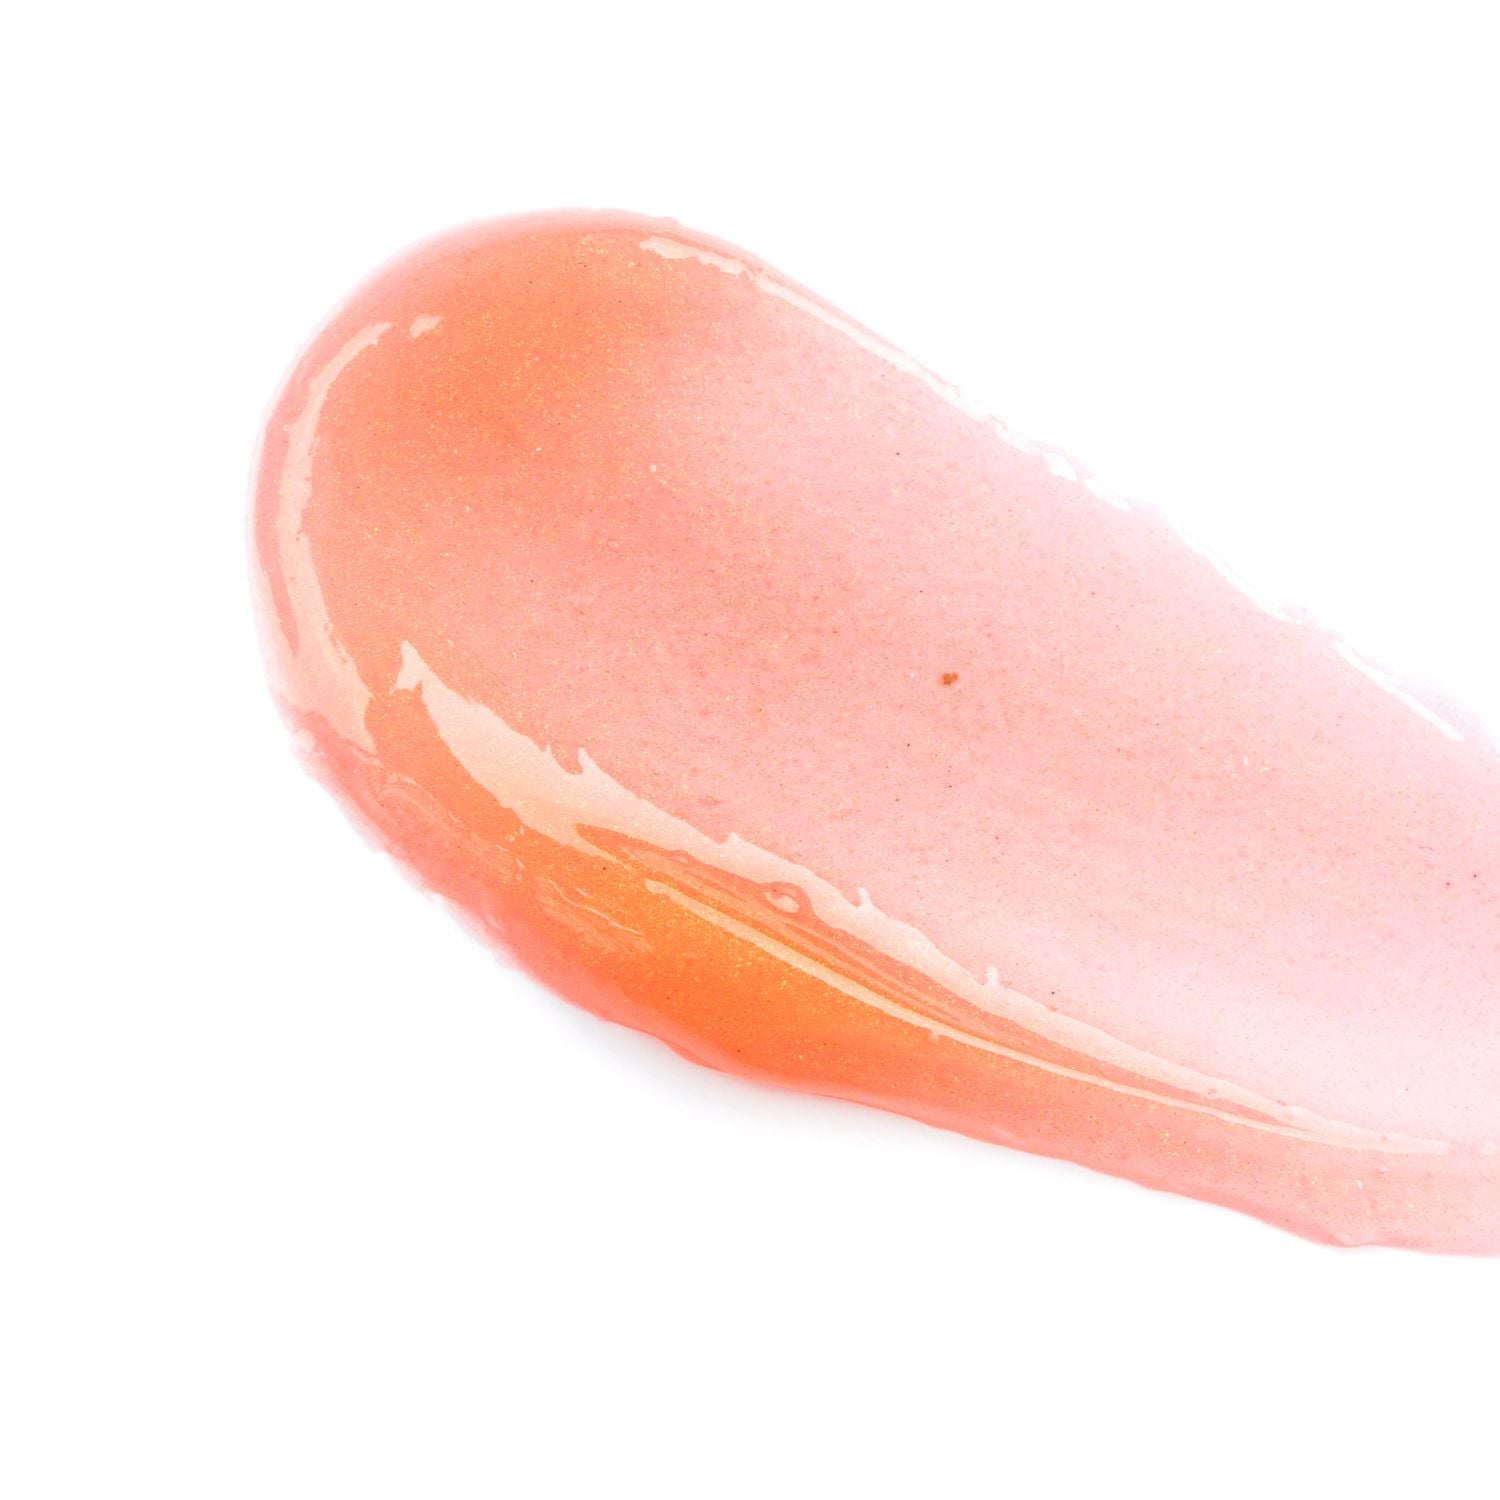 What are the Drawbacks of Lip Gloss